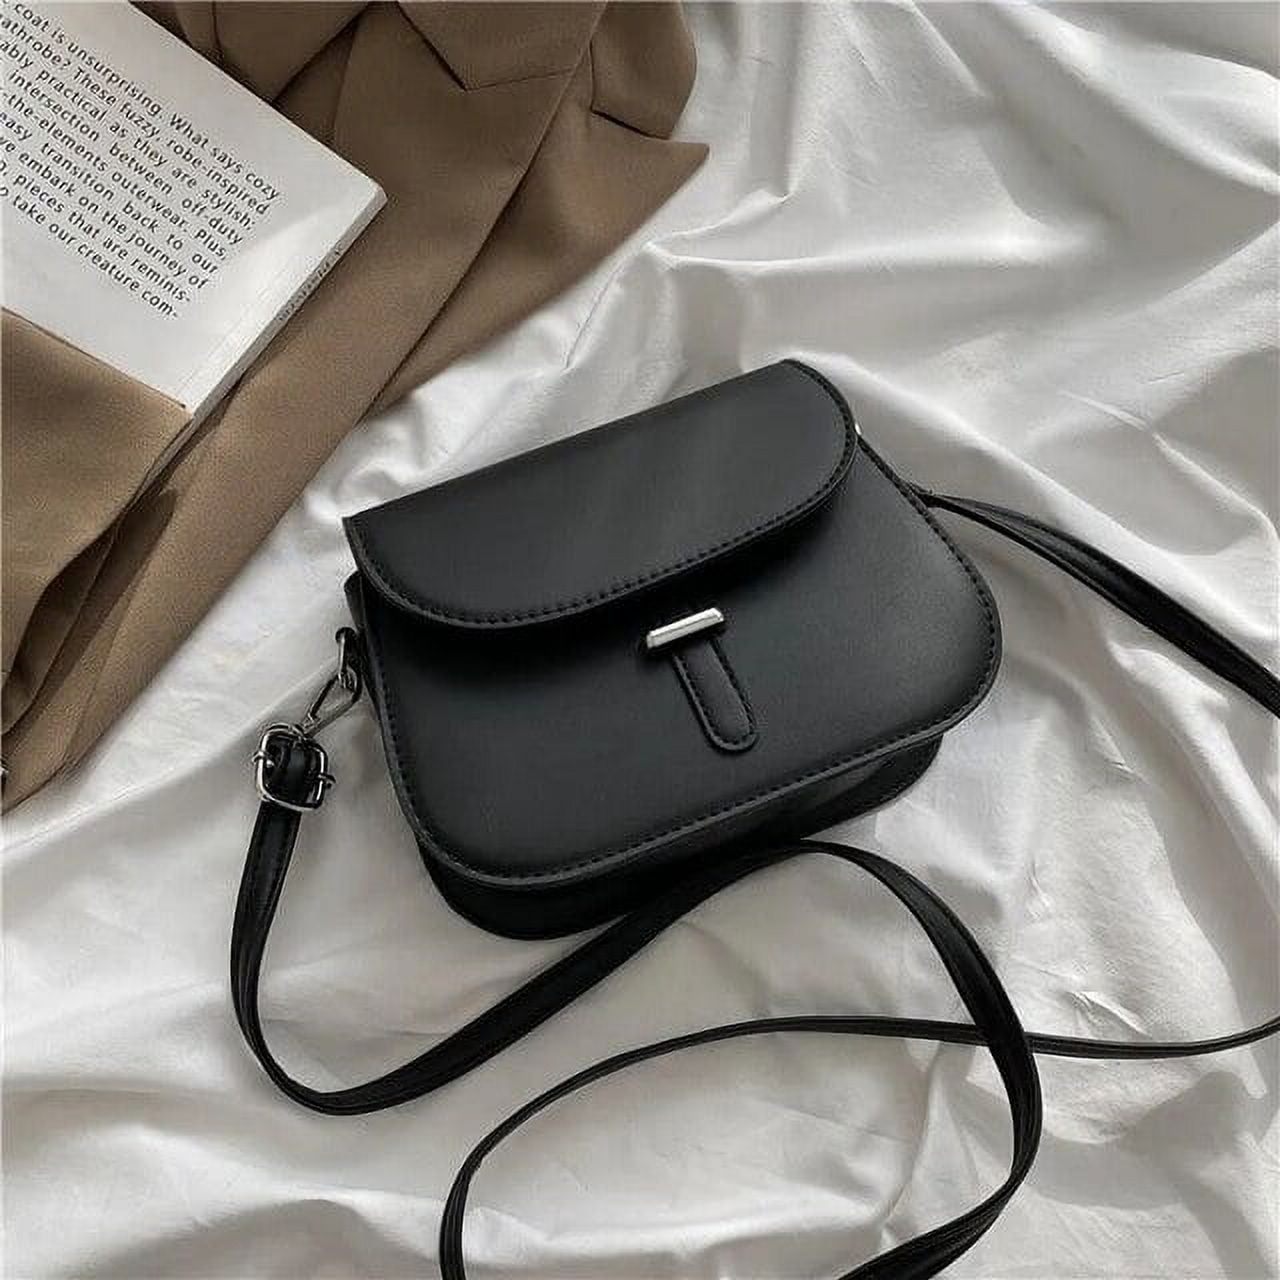 CoCopeaunt Soft Leather Crossbody Bags for Women Solid Color Shoulder Bag  Cell Phone Purse Small Handbags Girls NEW 